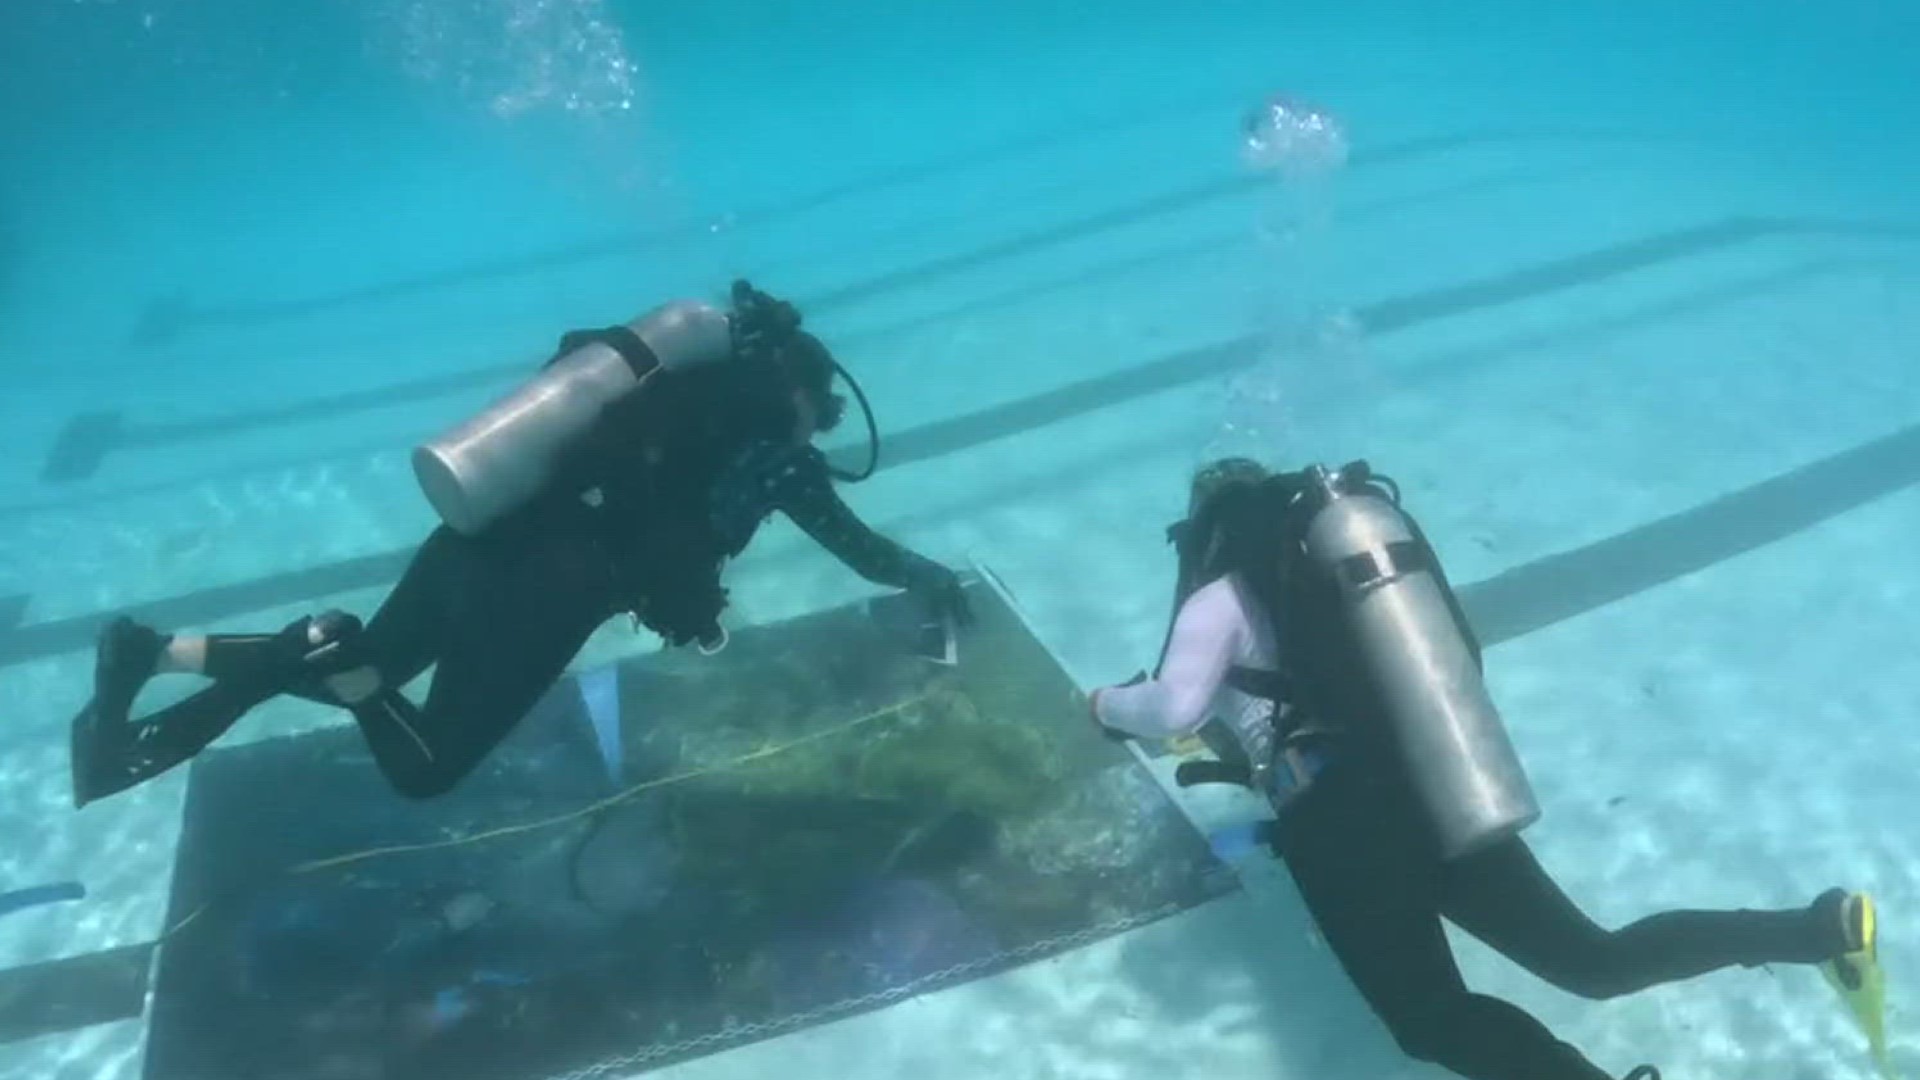 Texas A&M University-Corpus Christi marine biology department students had the chance for an in-depth and hands on learning experience about coral reefs.